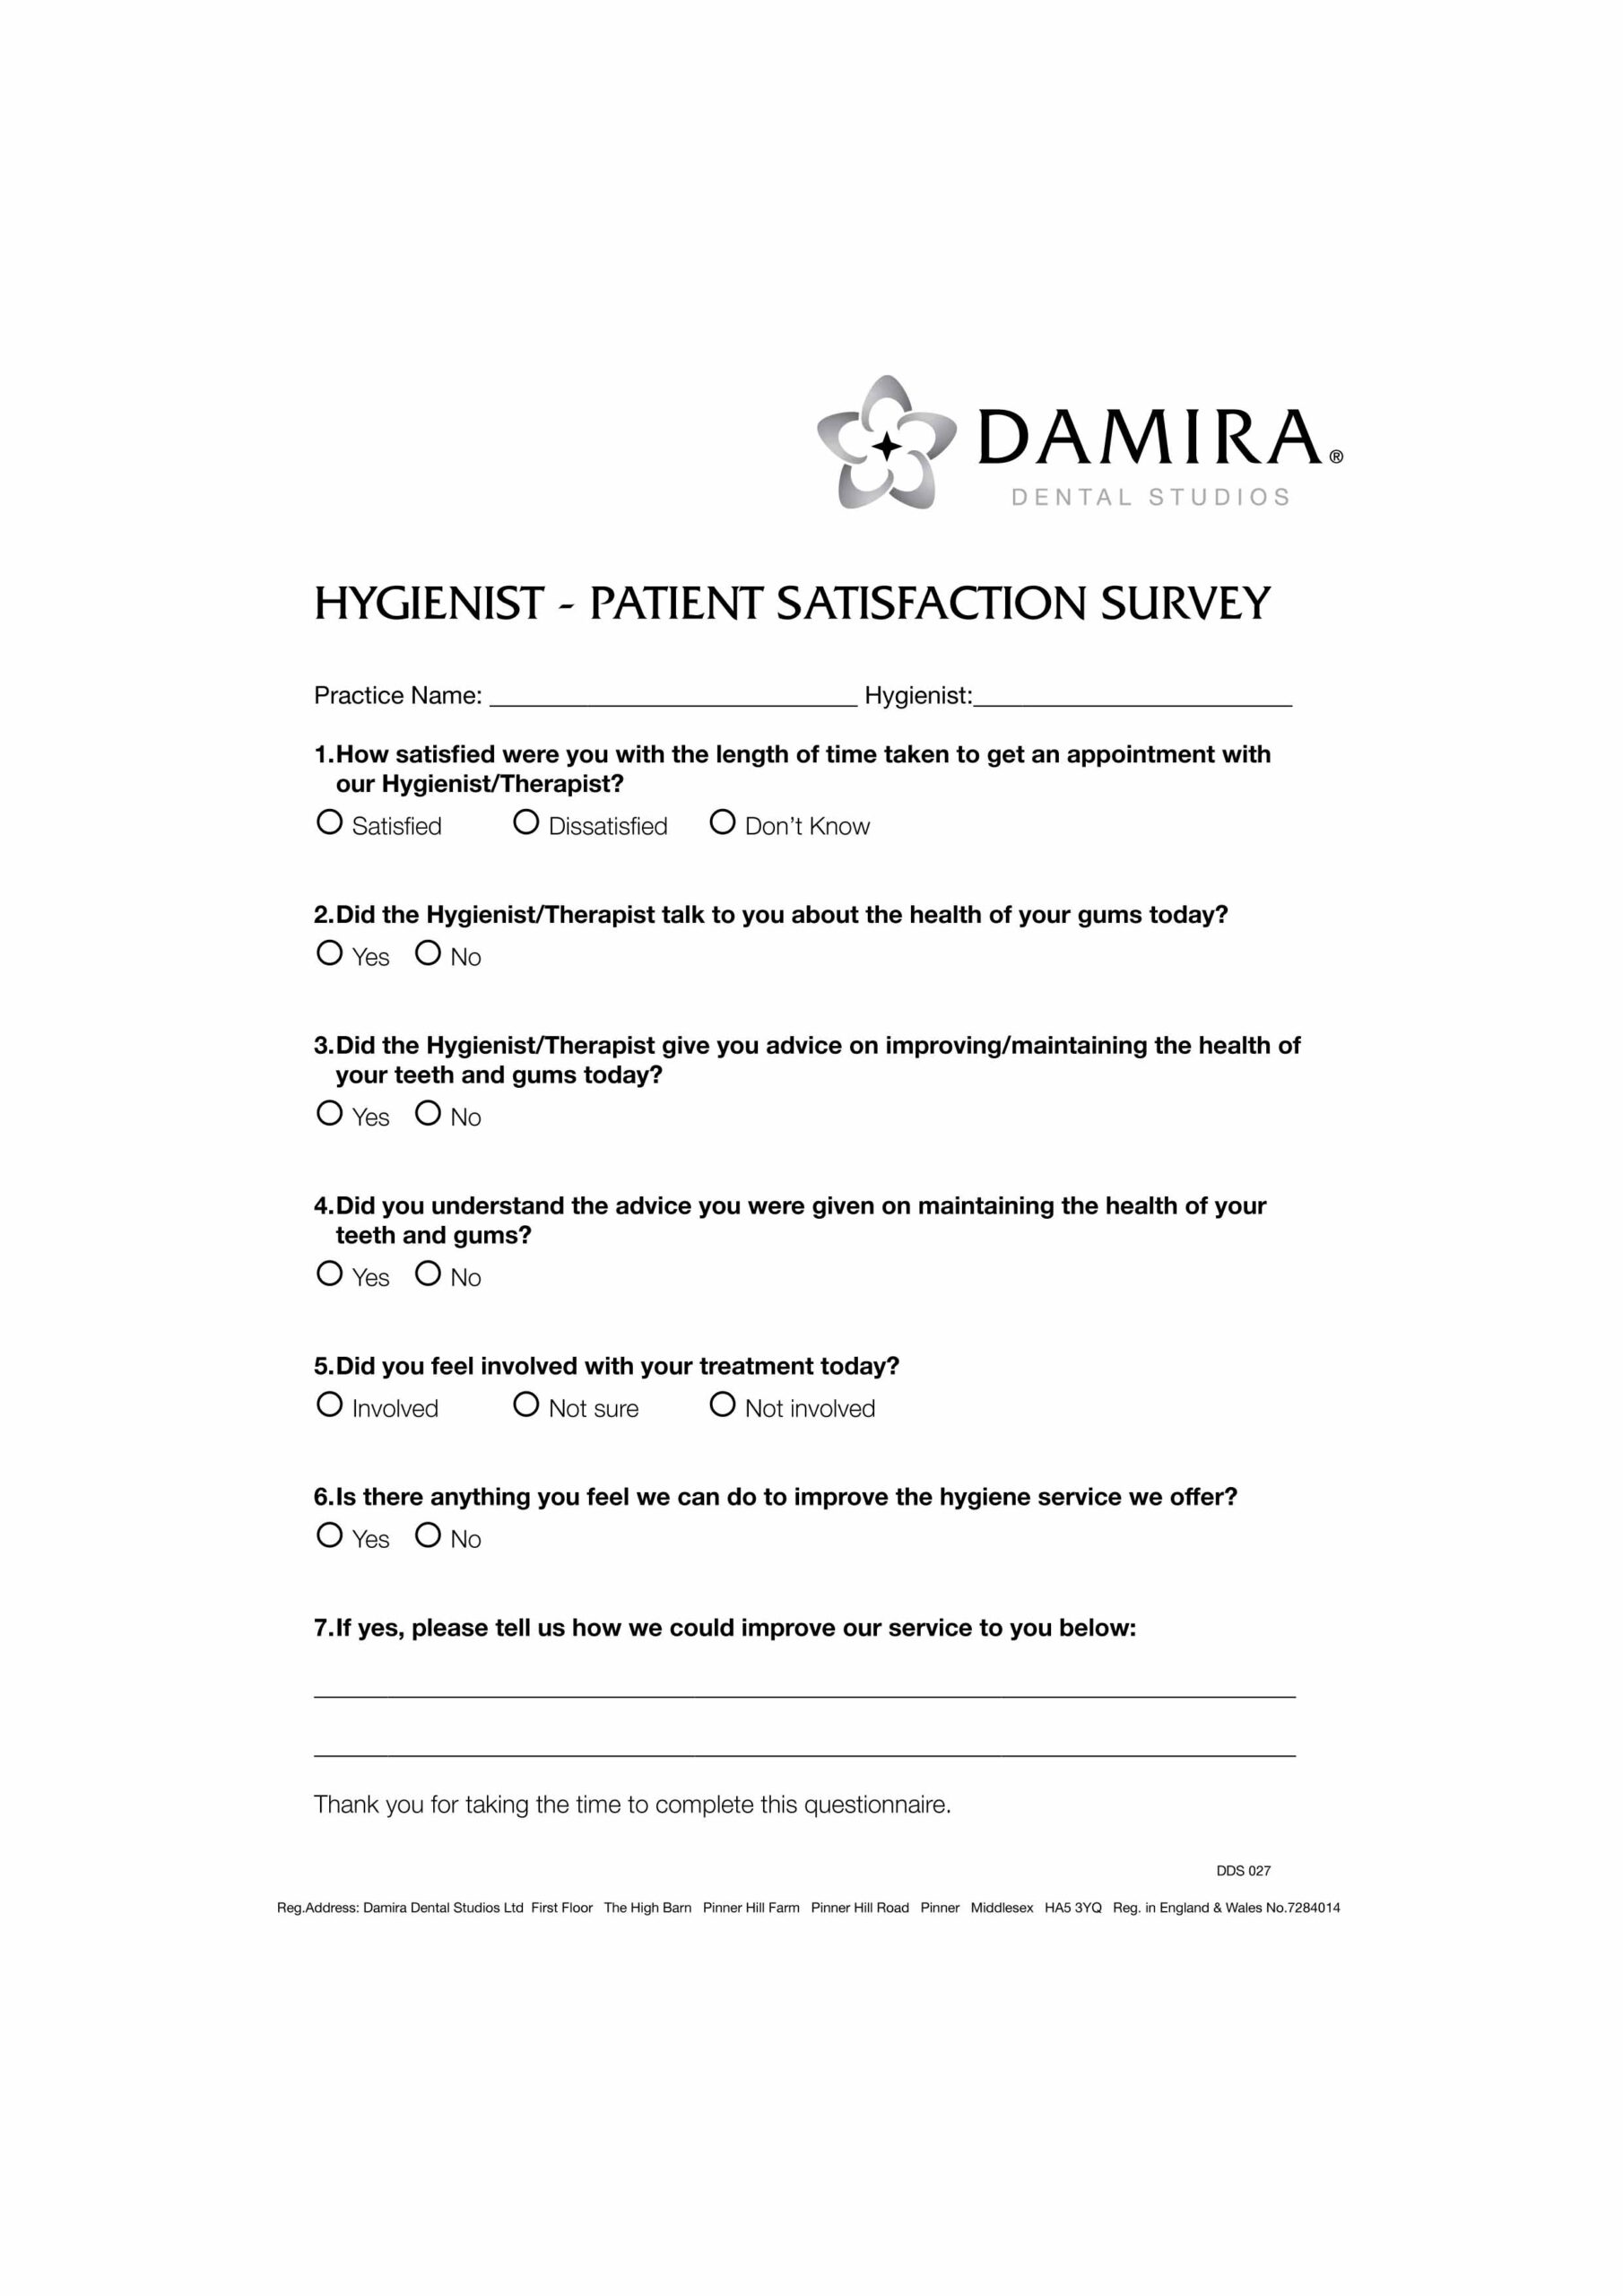 damira examples_0005_hygienist PSS DDS 027